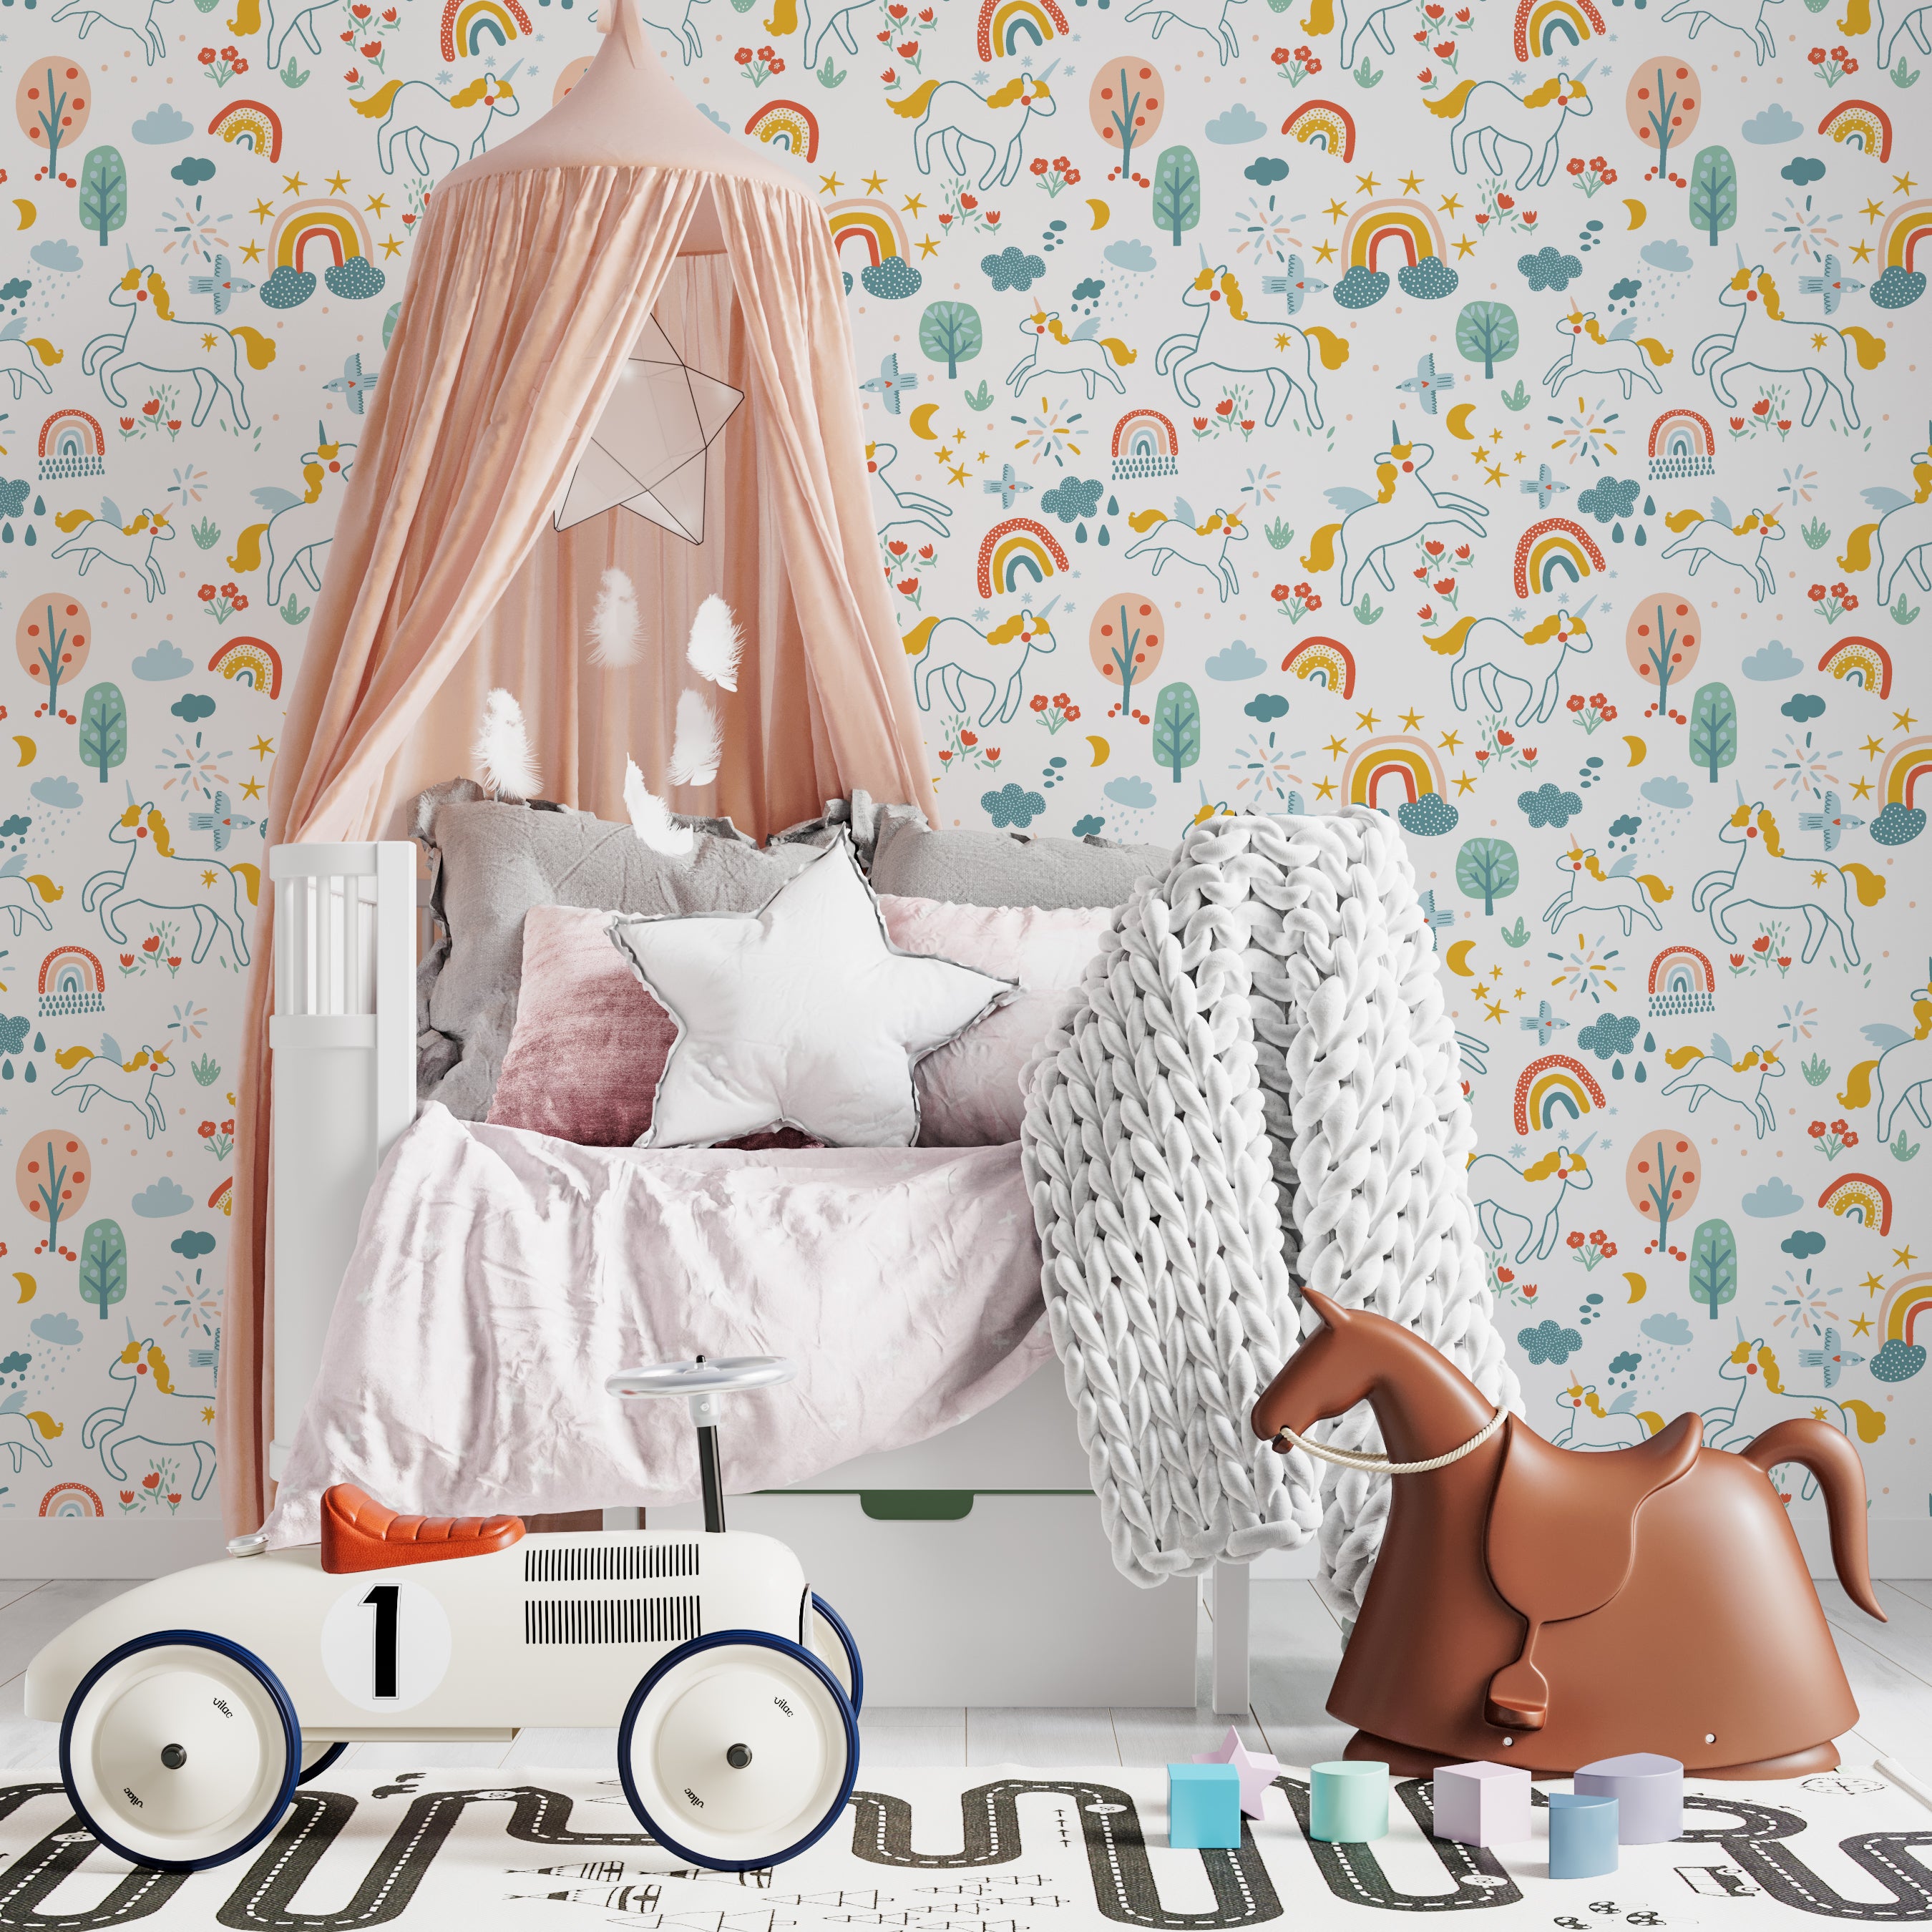 Children's bedroom showcasing a wall covered in a cheerful wallpaper featuring unicorns, rainbows, and nature motifs in soft colors, complemented by a cozy bed with a pink canopy and a toy car on a play mat.